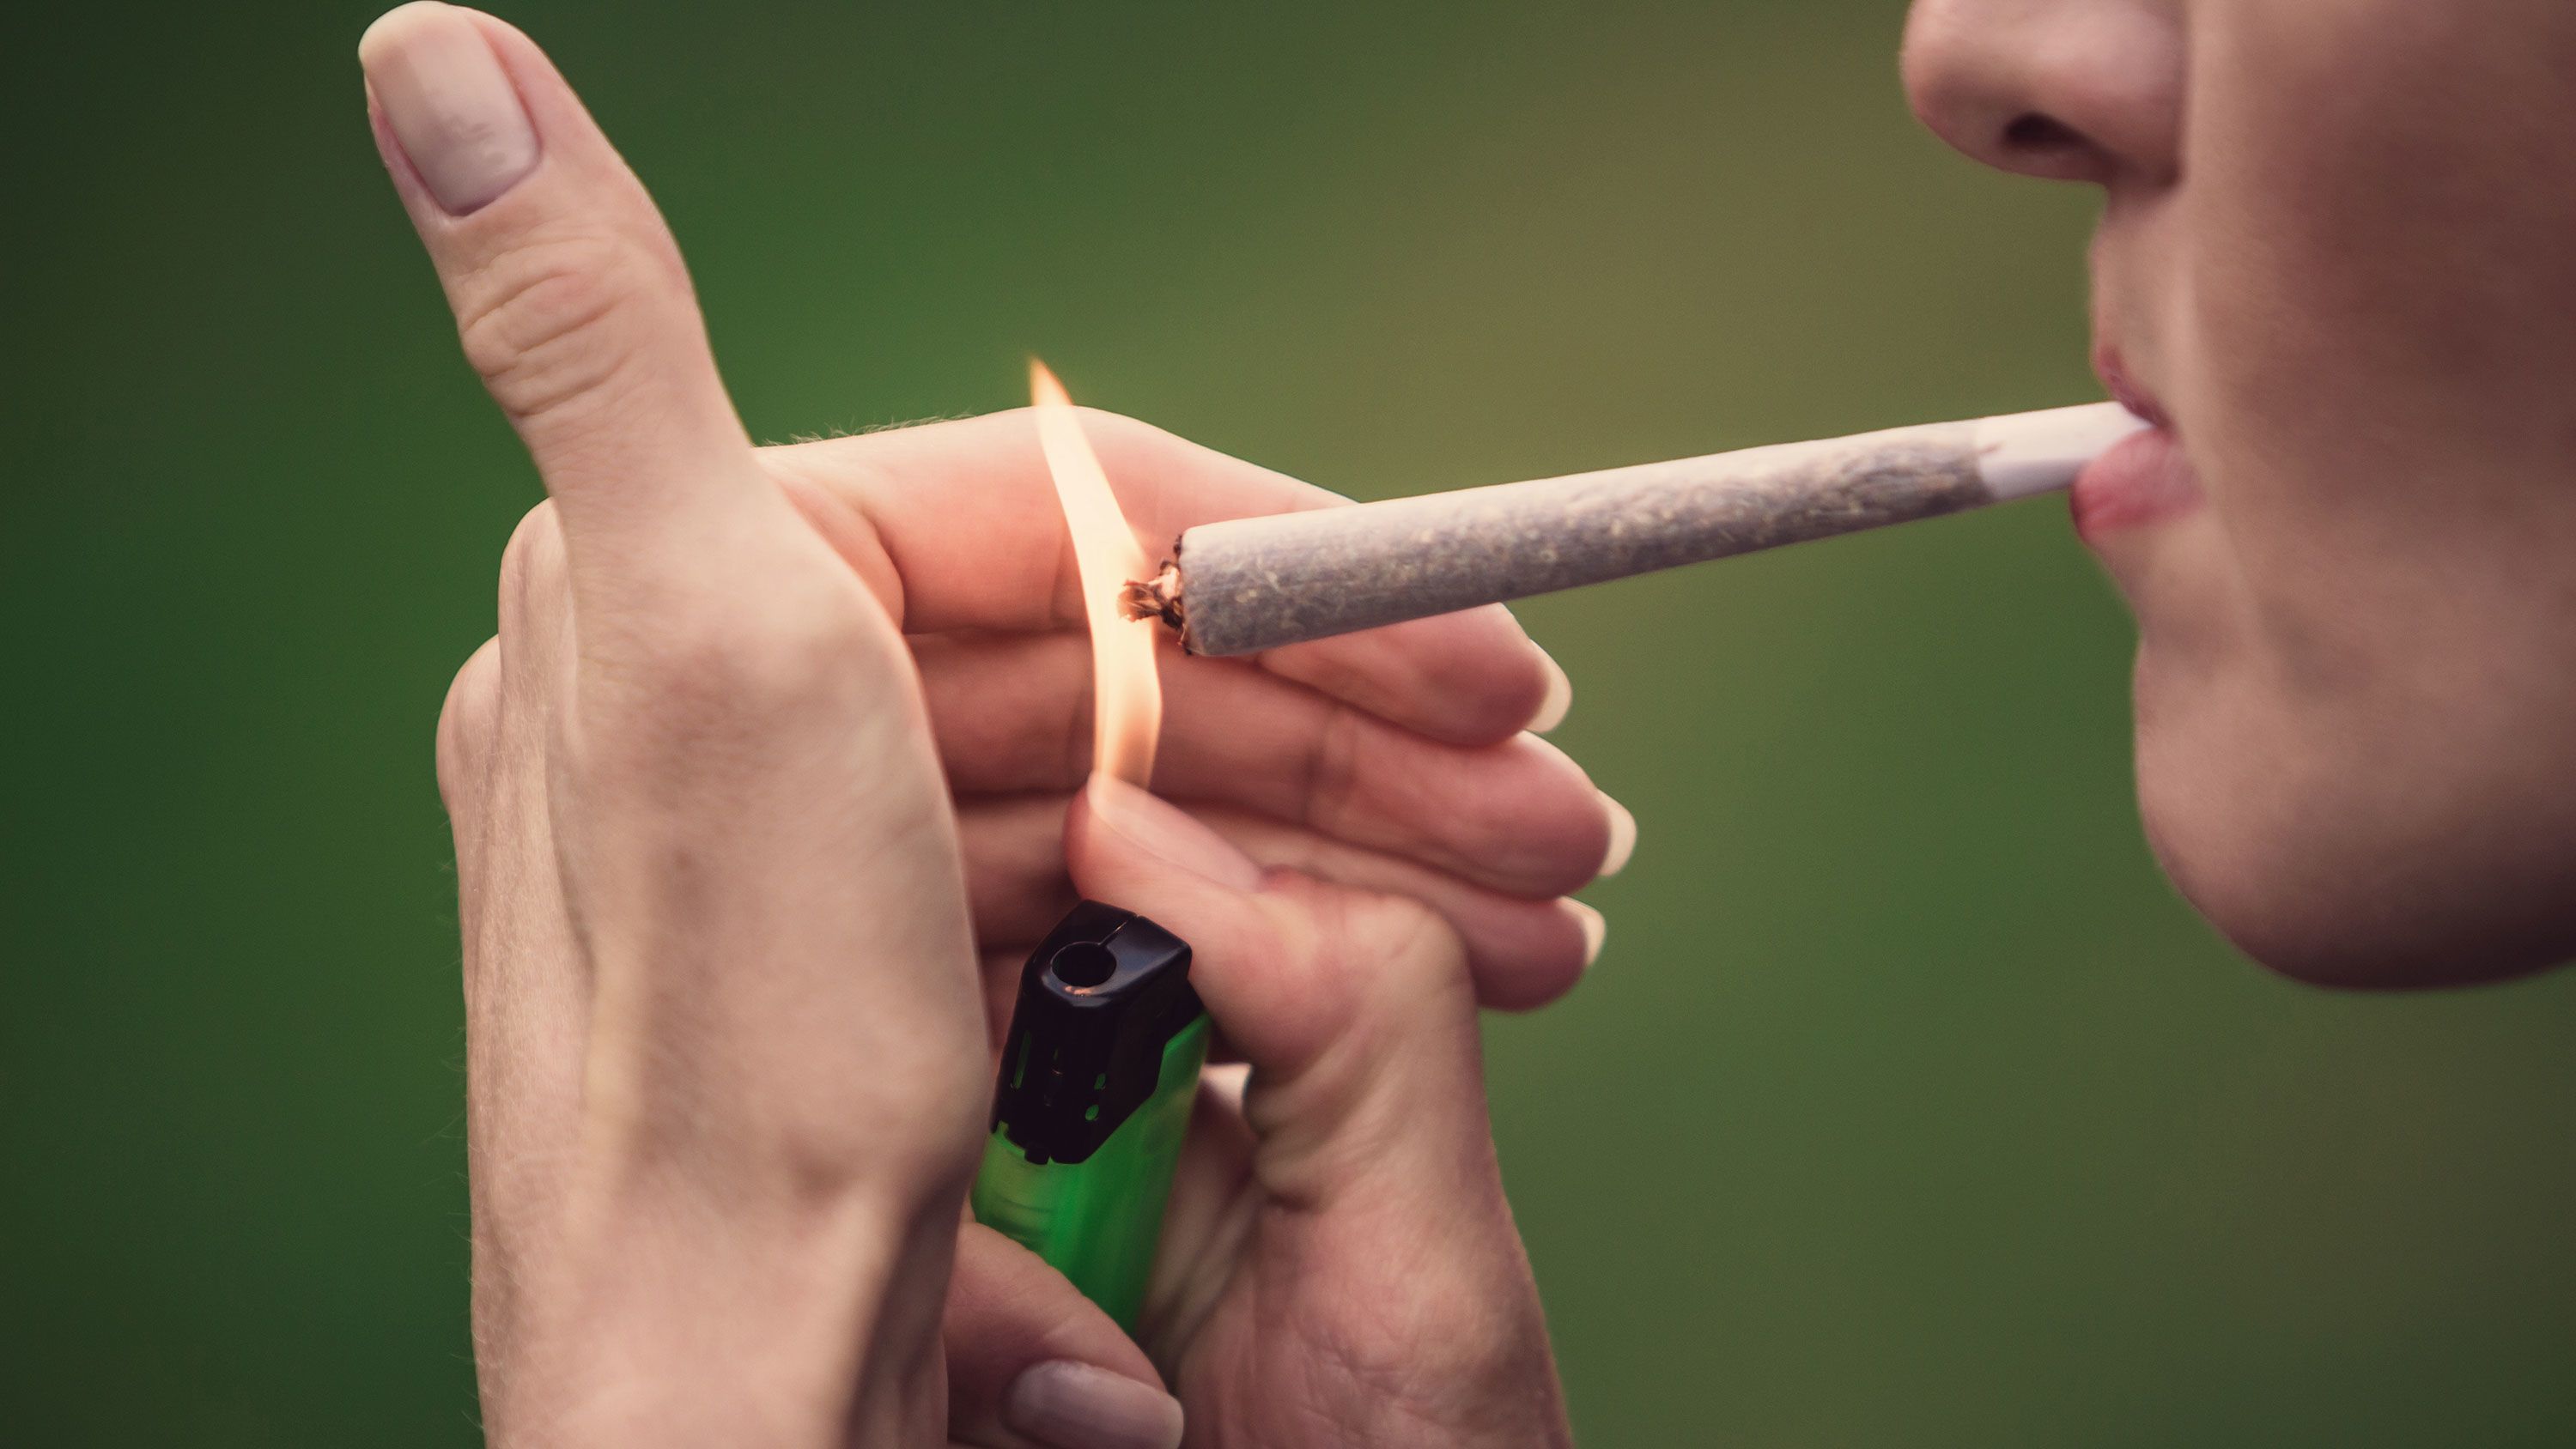 How to Get Really High From Smoking Weed